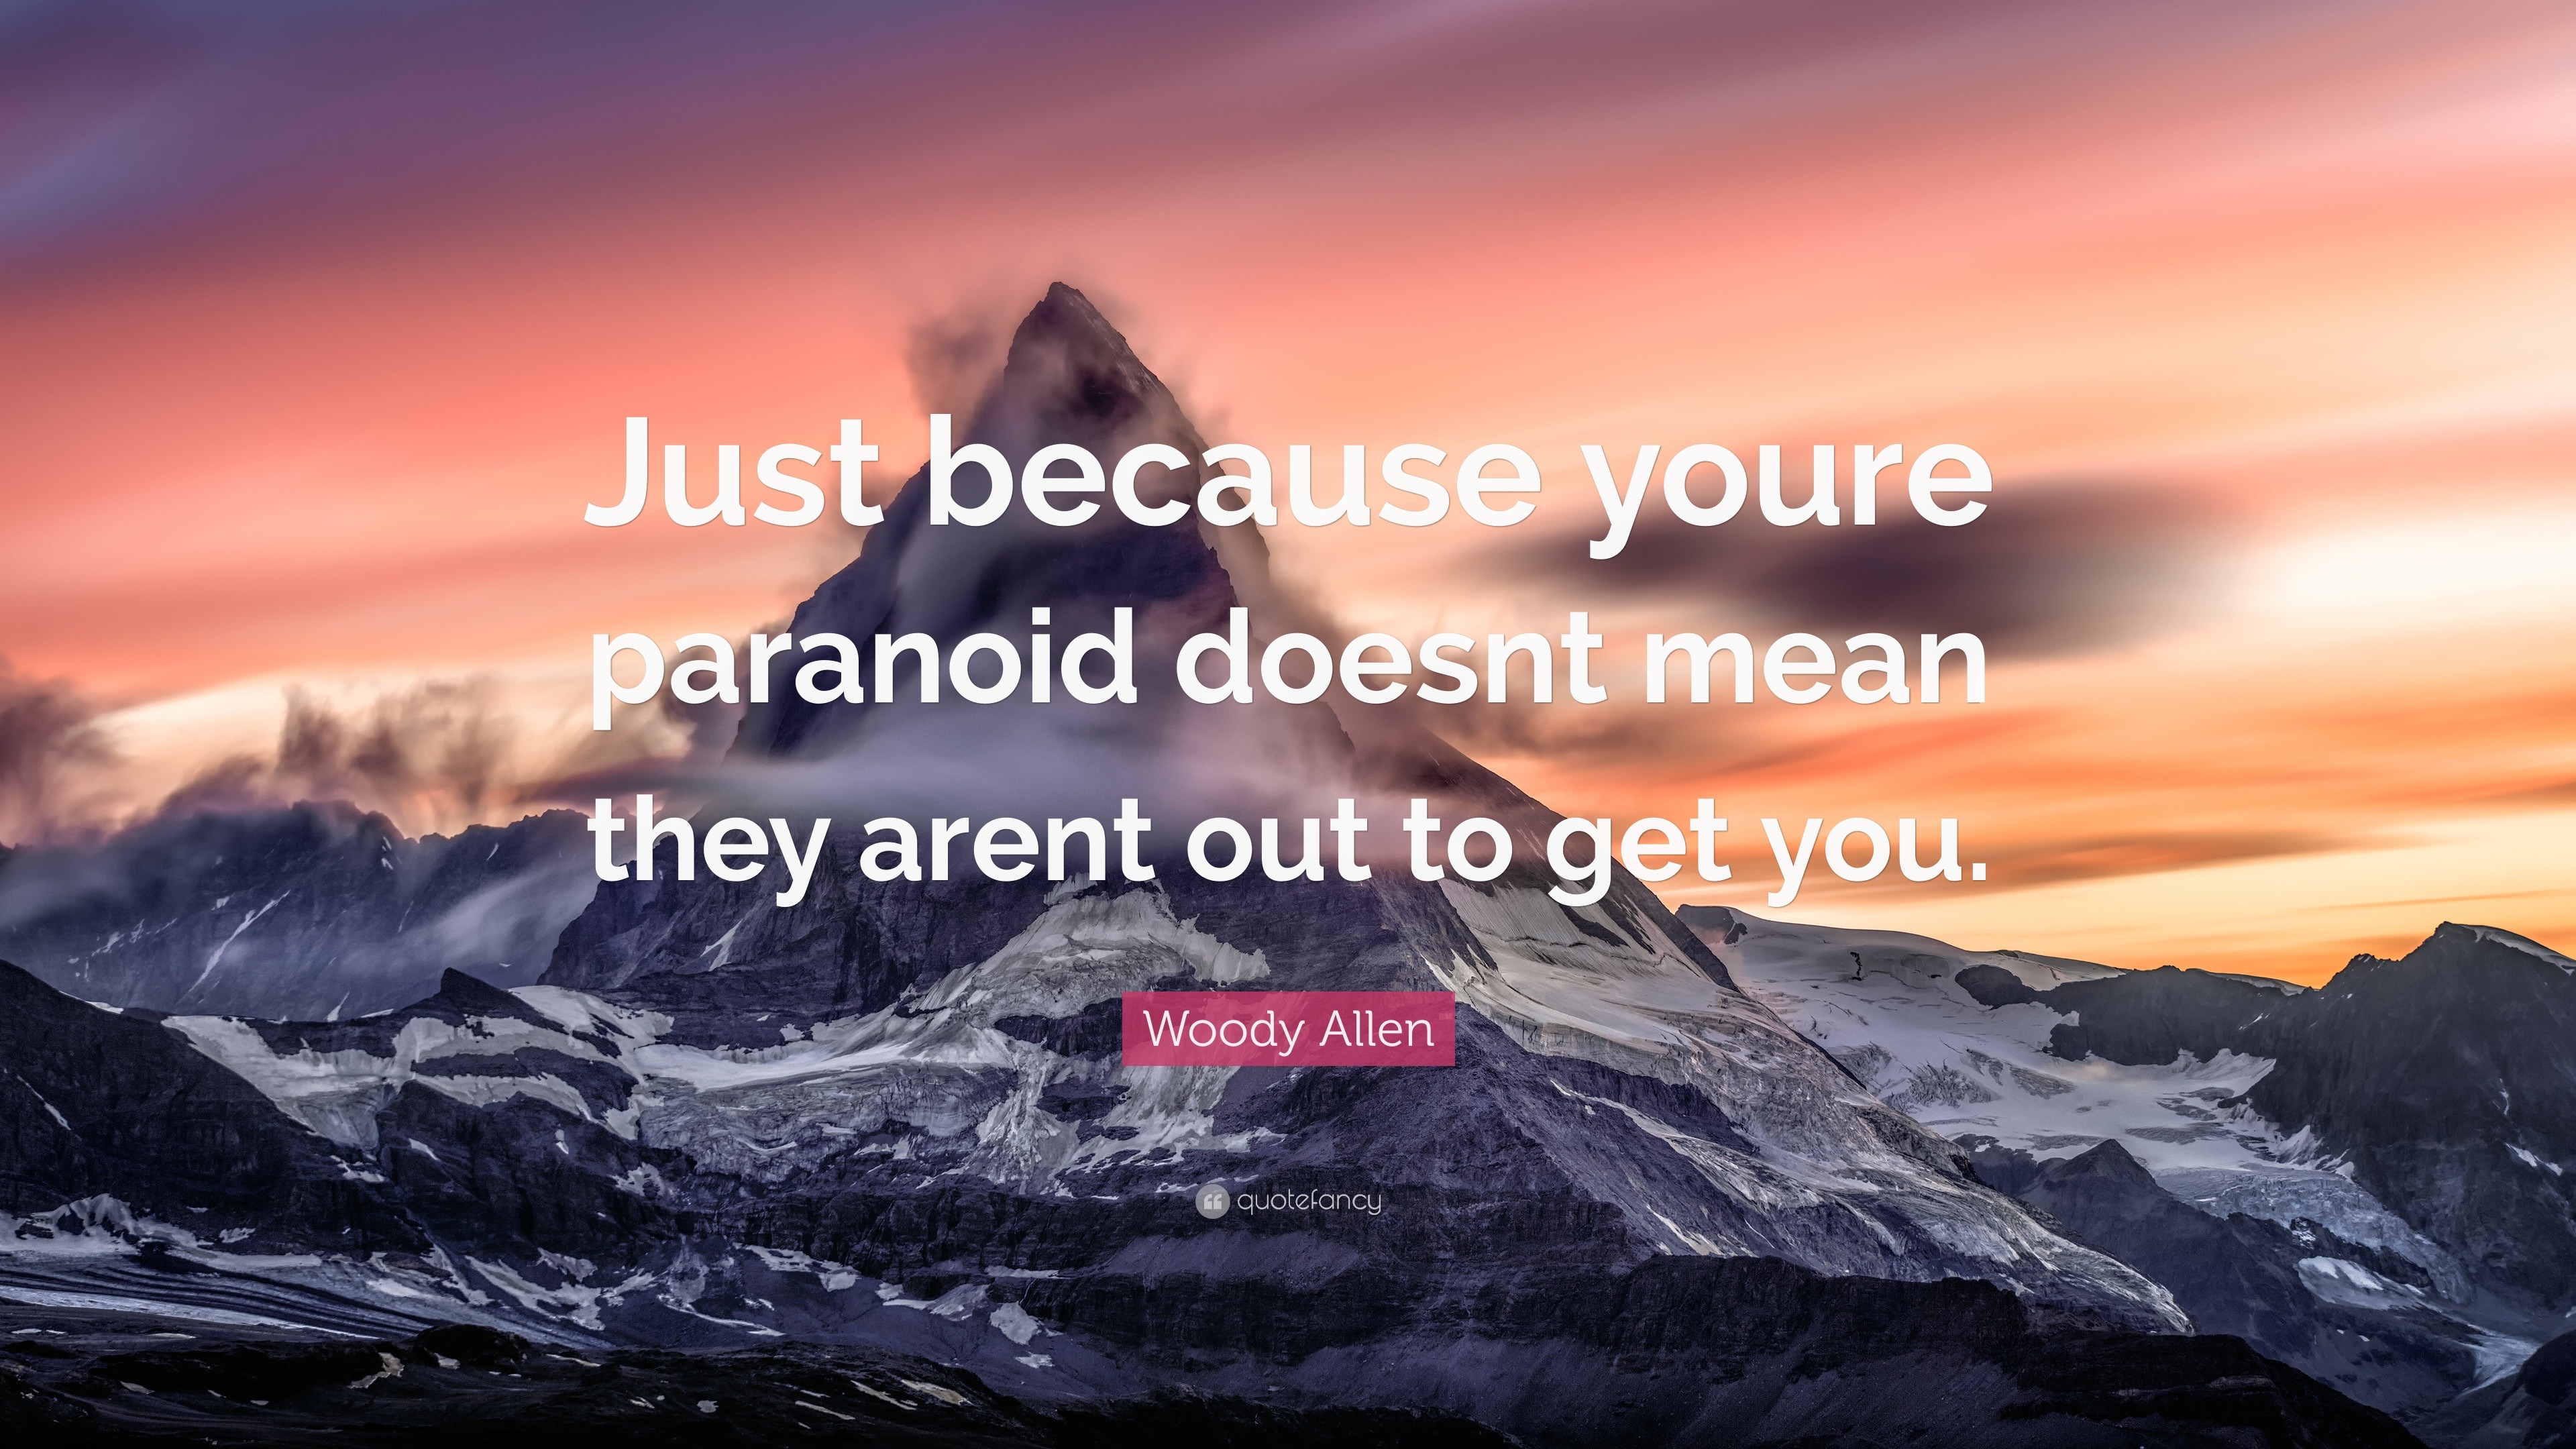 Woody Allen Quote: “Just because youre paranoid doesnt mean they arent